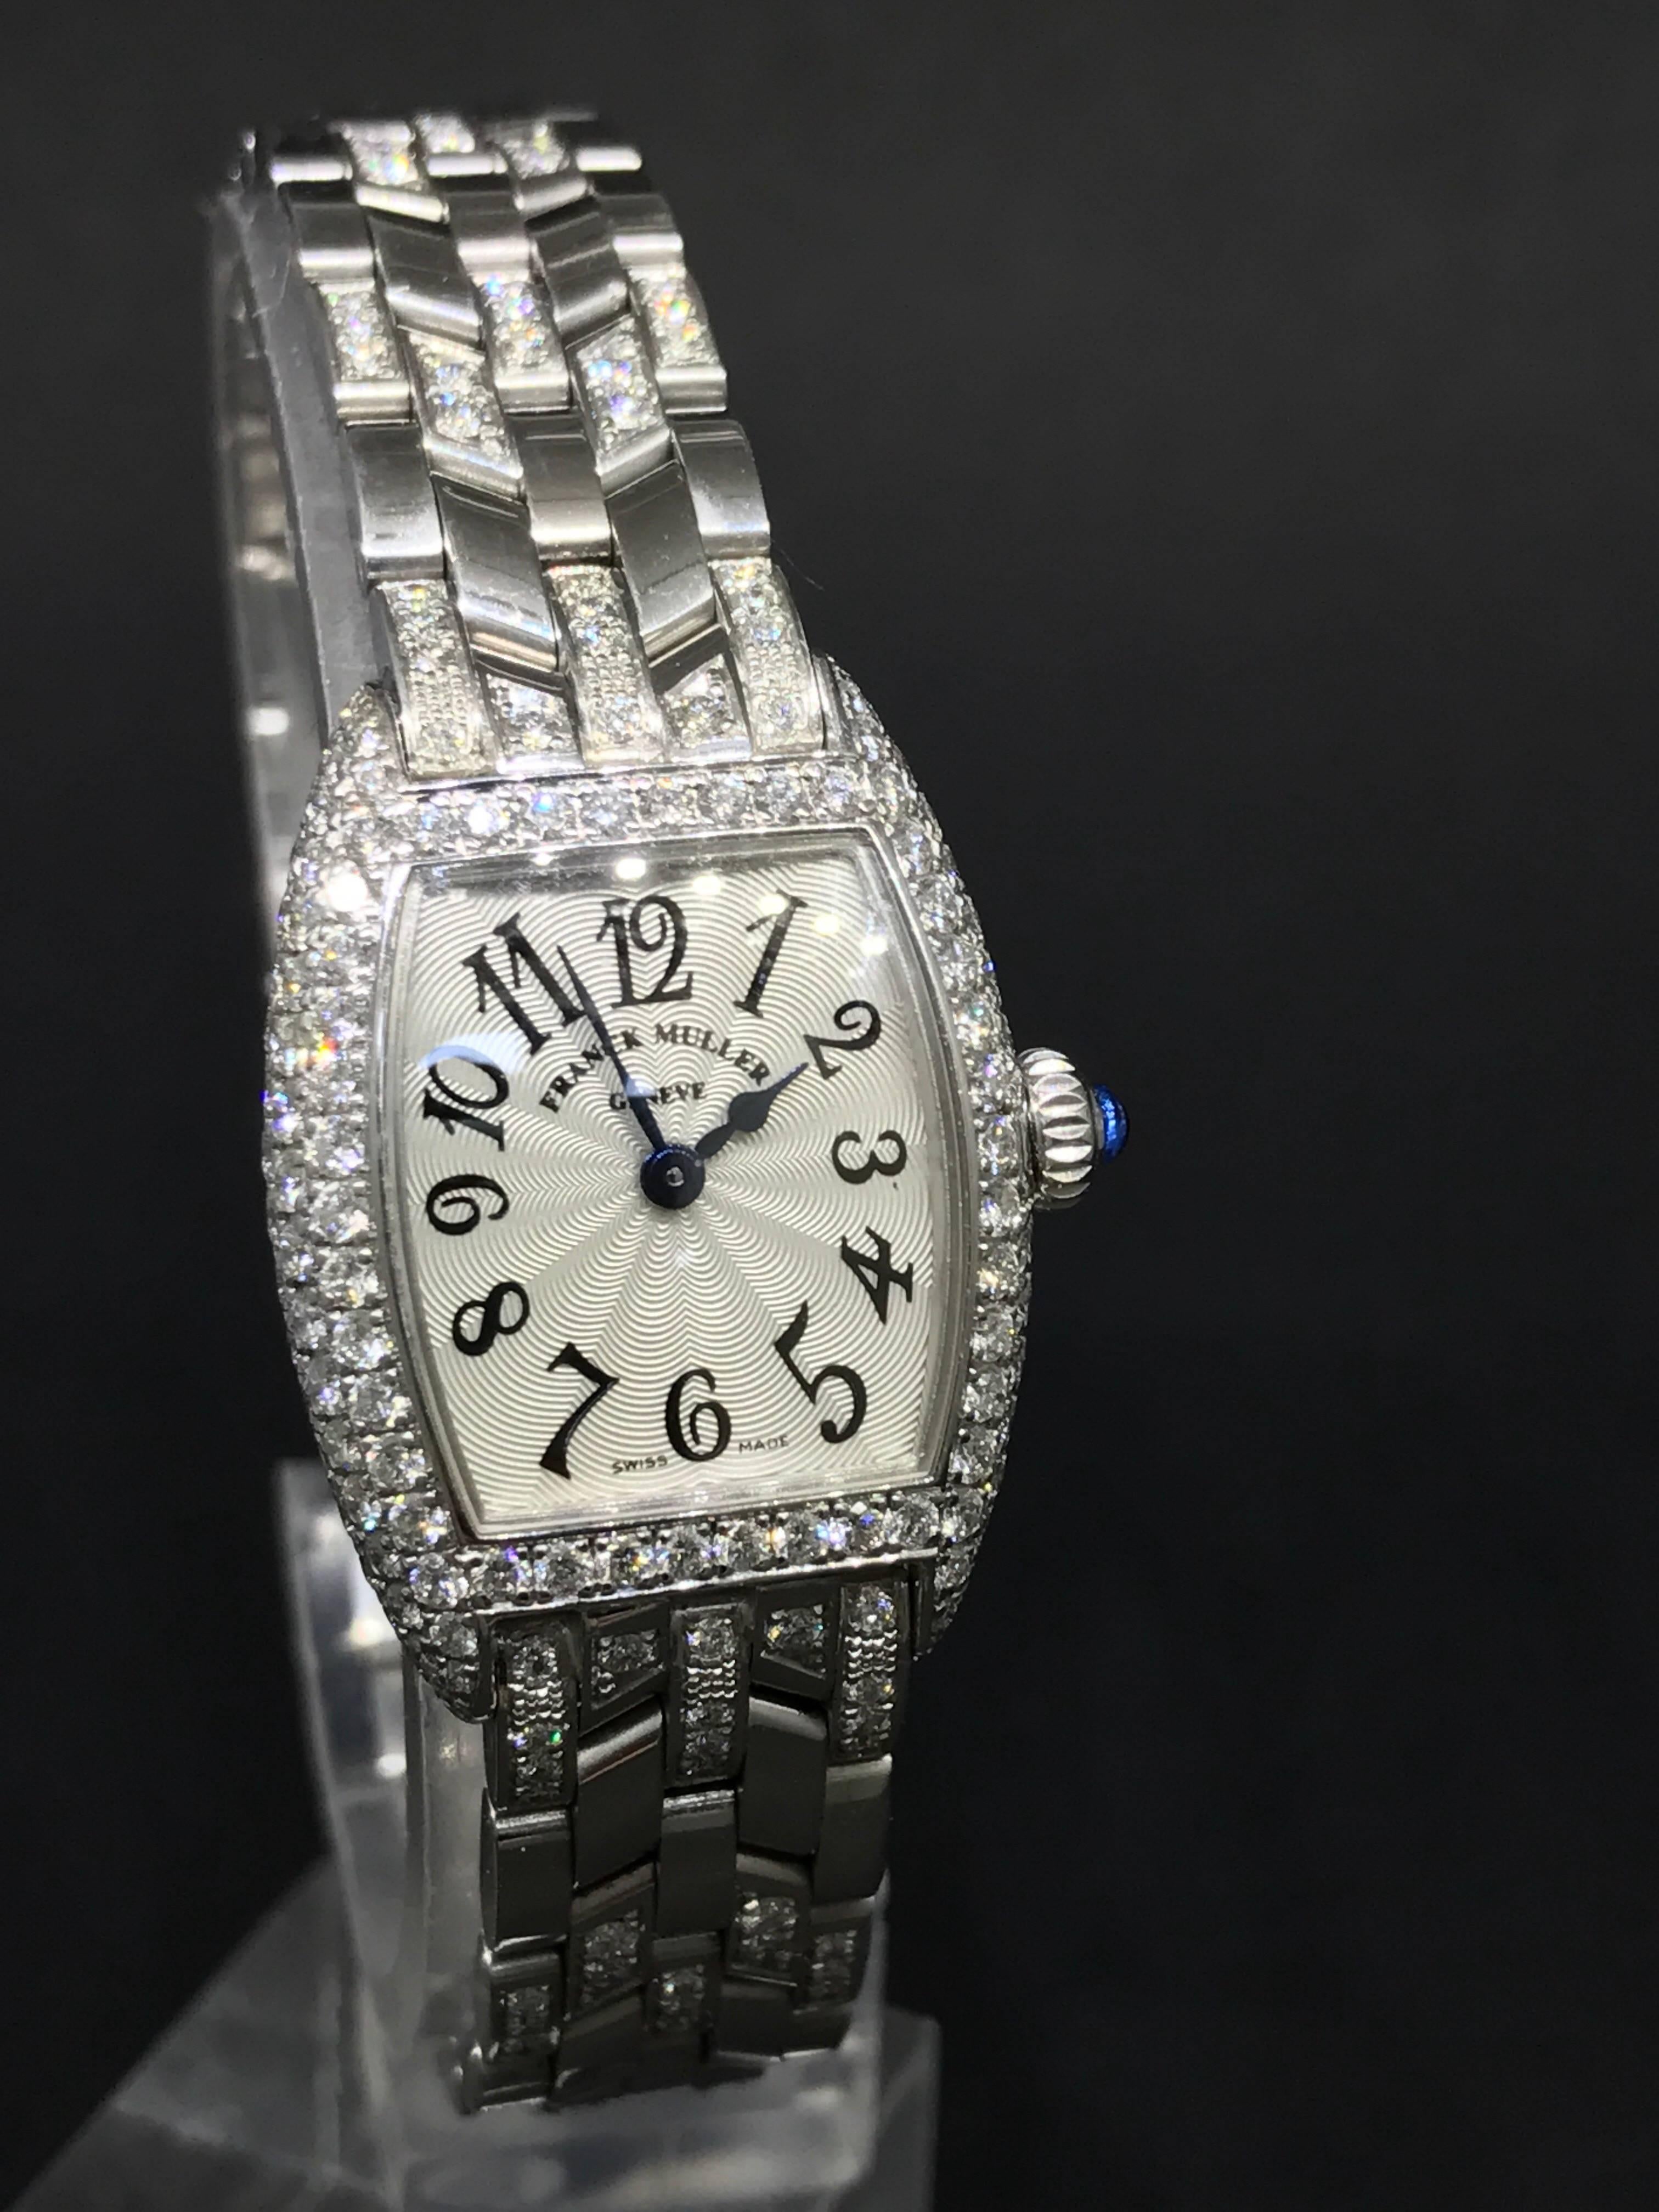 Franck Muller Cintree Curvex Ladies Watch

Model Number: 2500MCDB

100% Authentic

Brand New / Old Stock

Comes with original Franck Muller box and warranty

18 Karat White Gold

Case and bracelet set with diamonds

Silvered Guilloche dial

Case